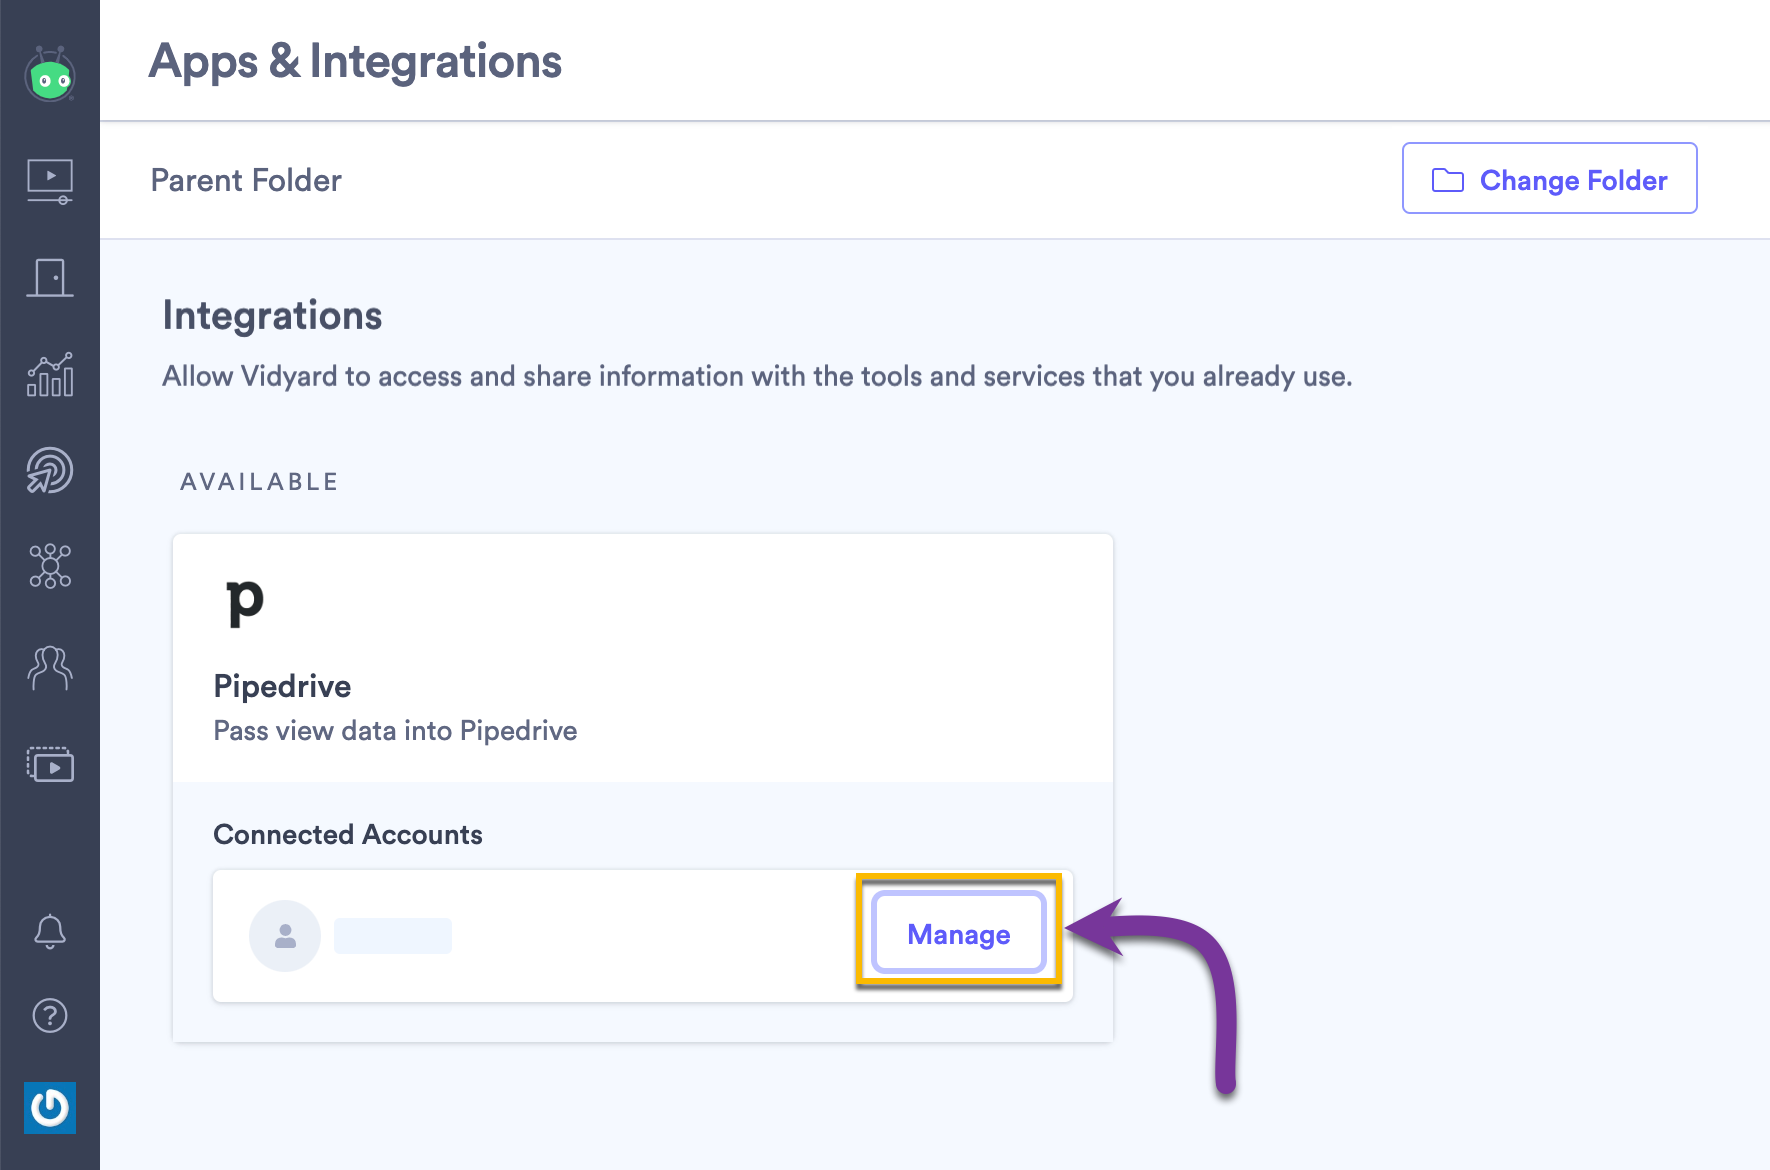 On the integrations page in Vidyard, selecting the Manage button next to Pipedrive to delete the integration